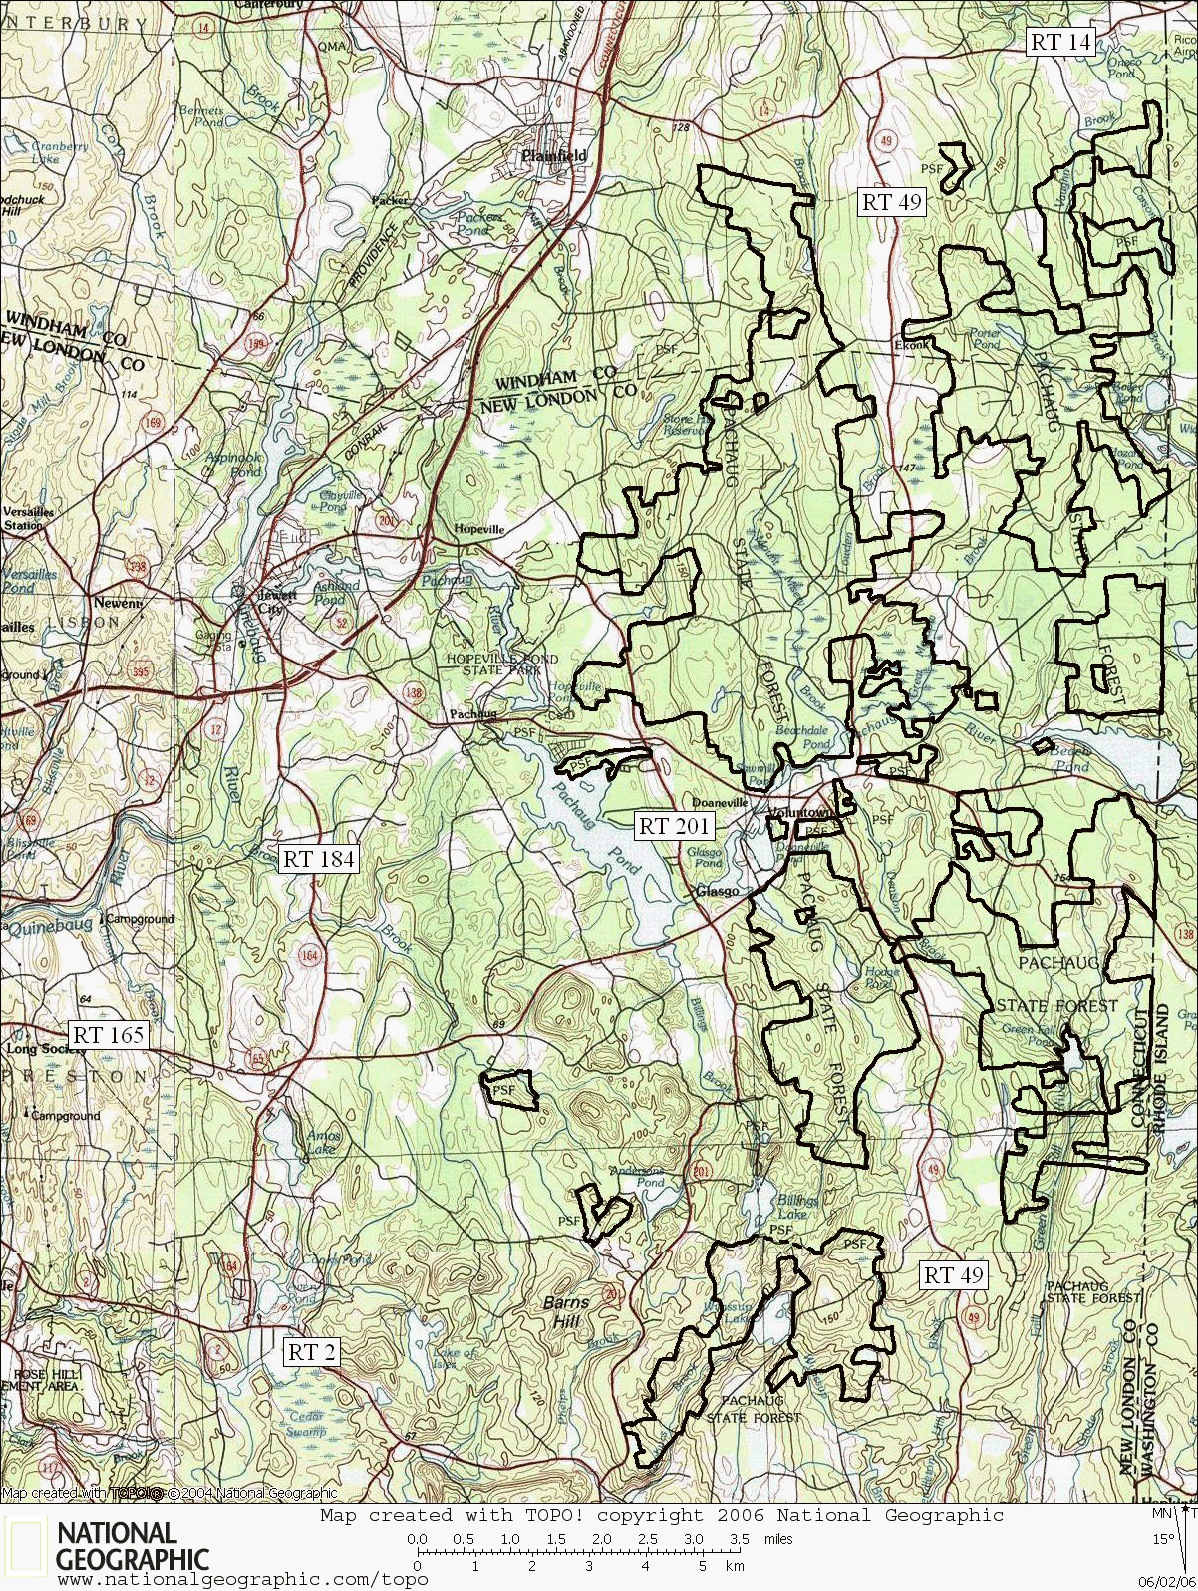 Pachaug, State Forest, Connecticut, Hiking, Trail, Map